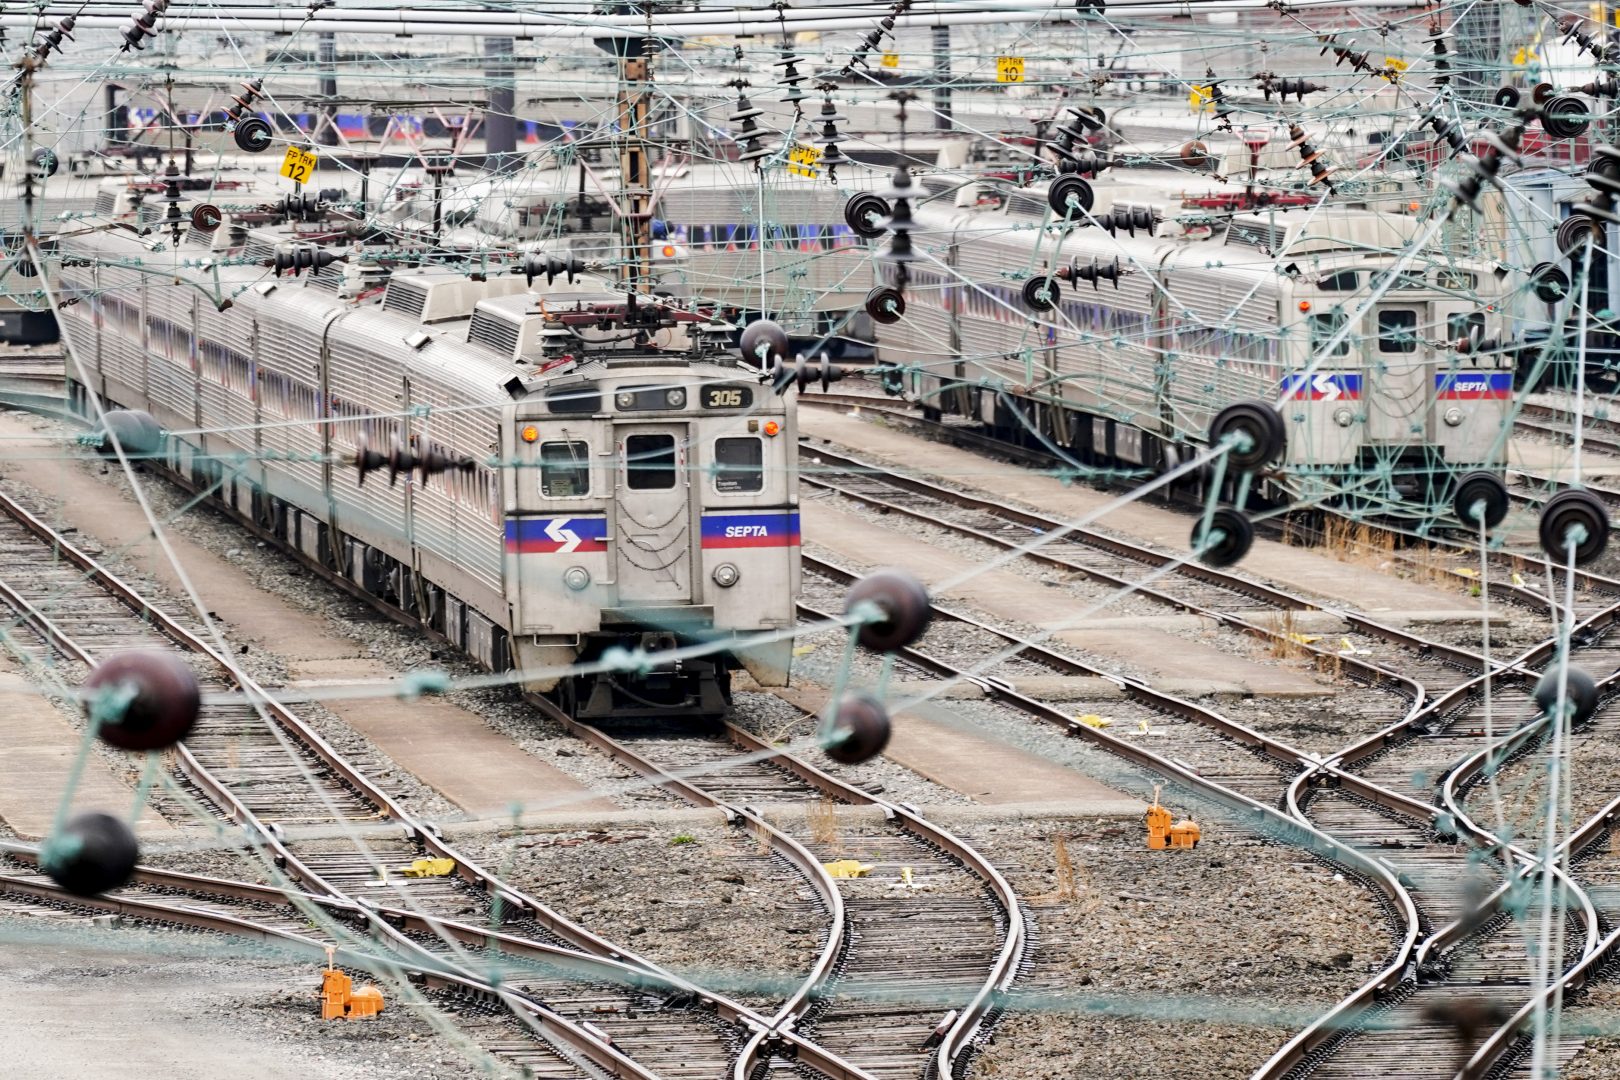 Southeastern Pennsylvania Transportation Authority trains are parked near 30th Street Station in Philadelphia, Wednesday, March 31, 2021.